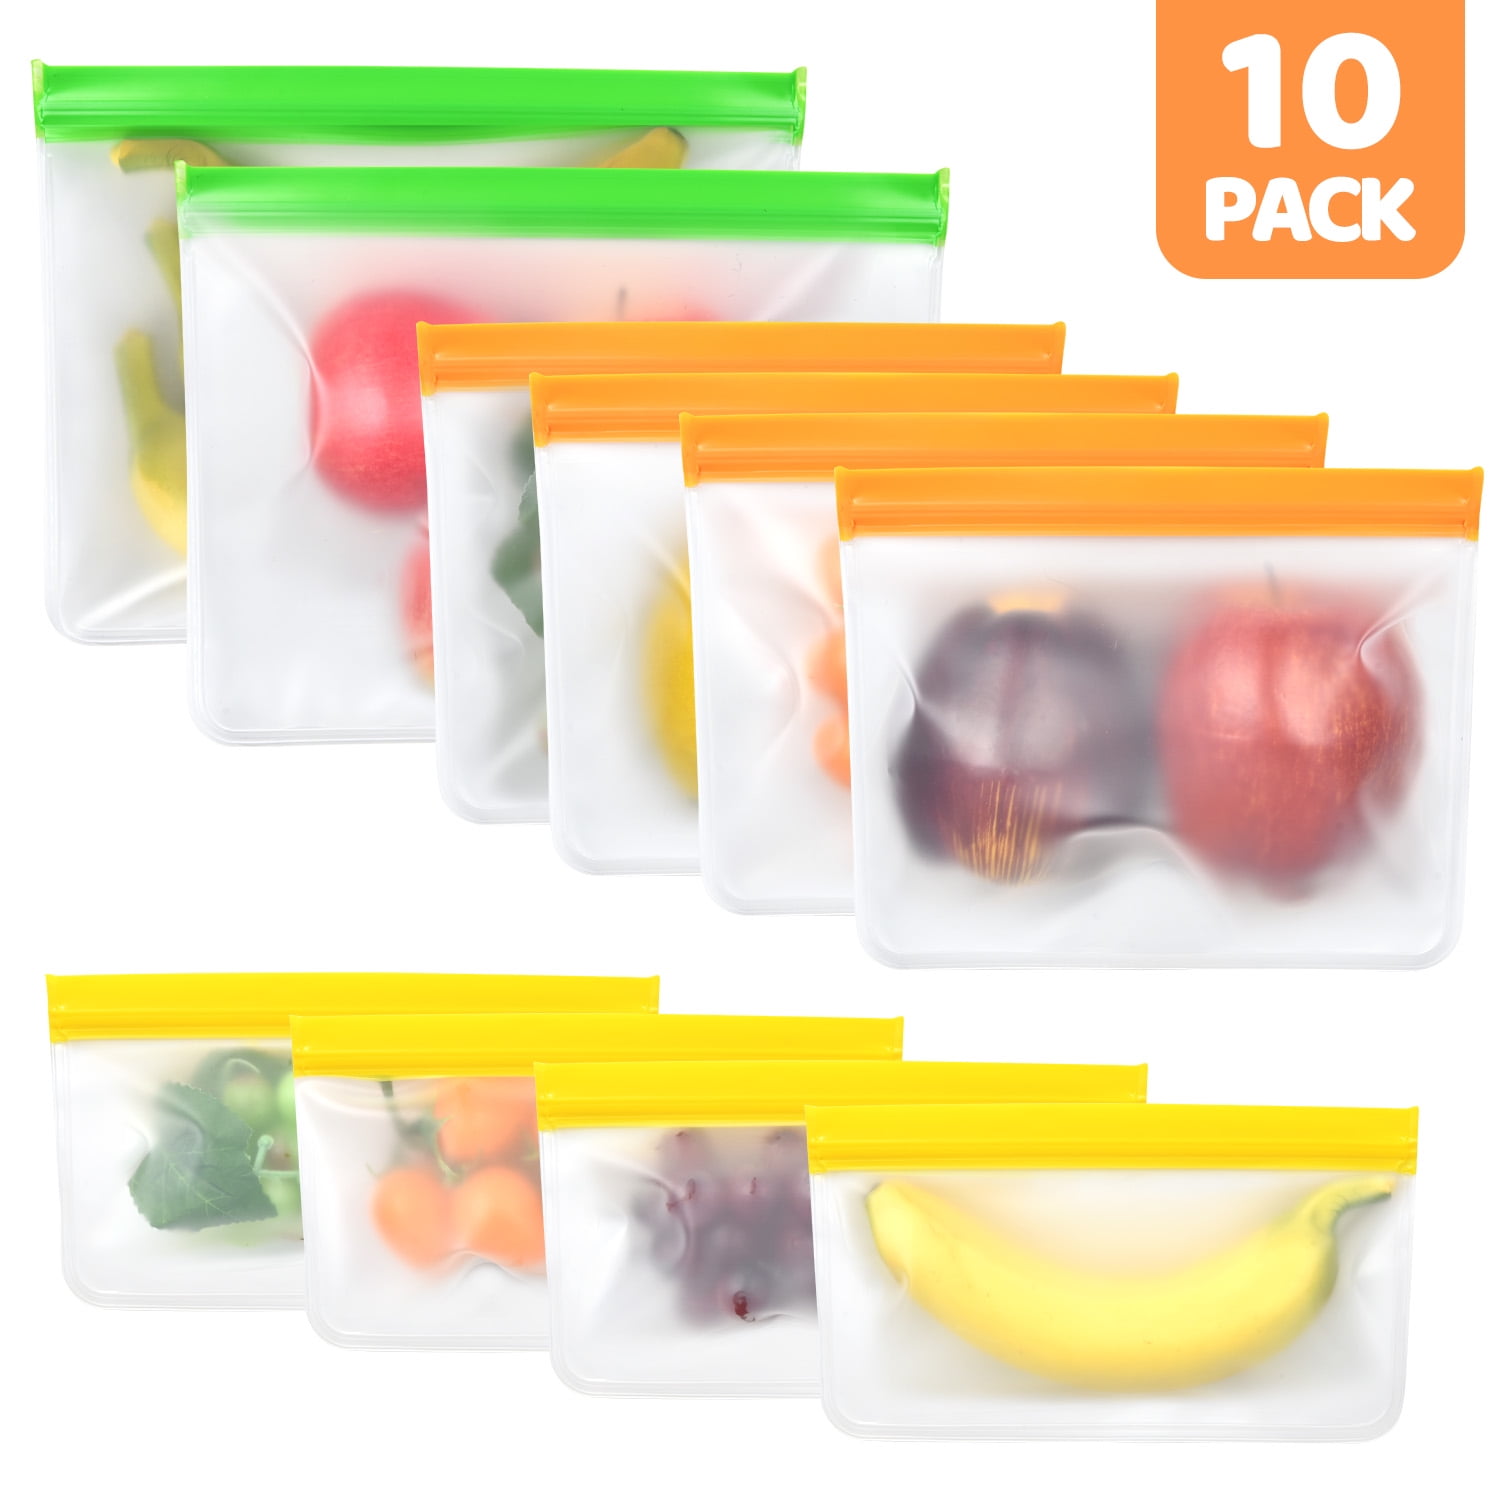 Reusable Gallon Freezer Bags - 6 Pack LEAKPROOF EXTRA THICK 1 Gallon Bags  for Marinate Food & Fruit Cereal Sandwich Snack Meal Prep Travel Items Home